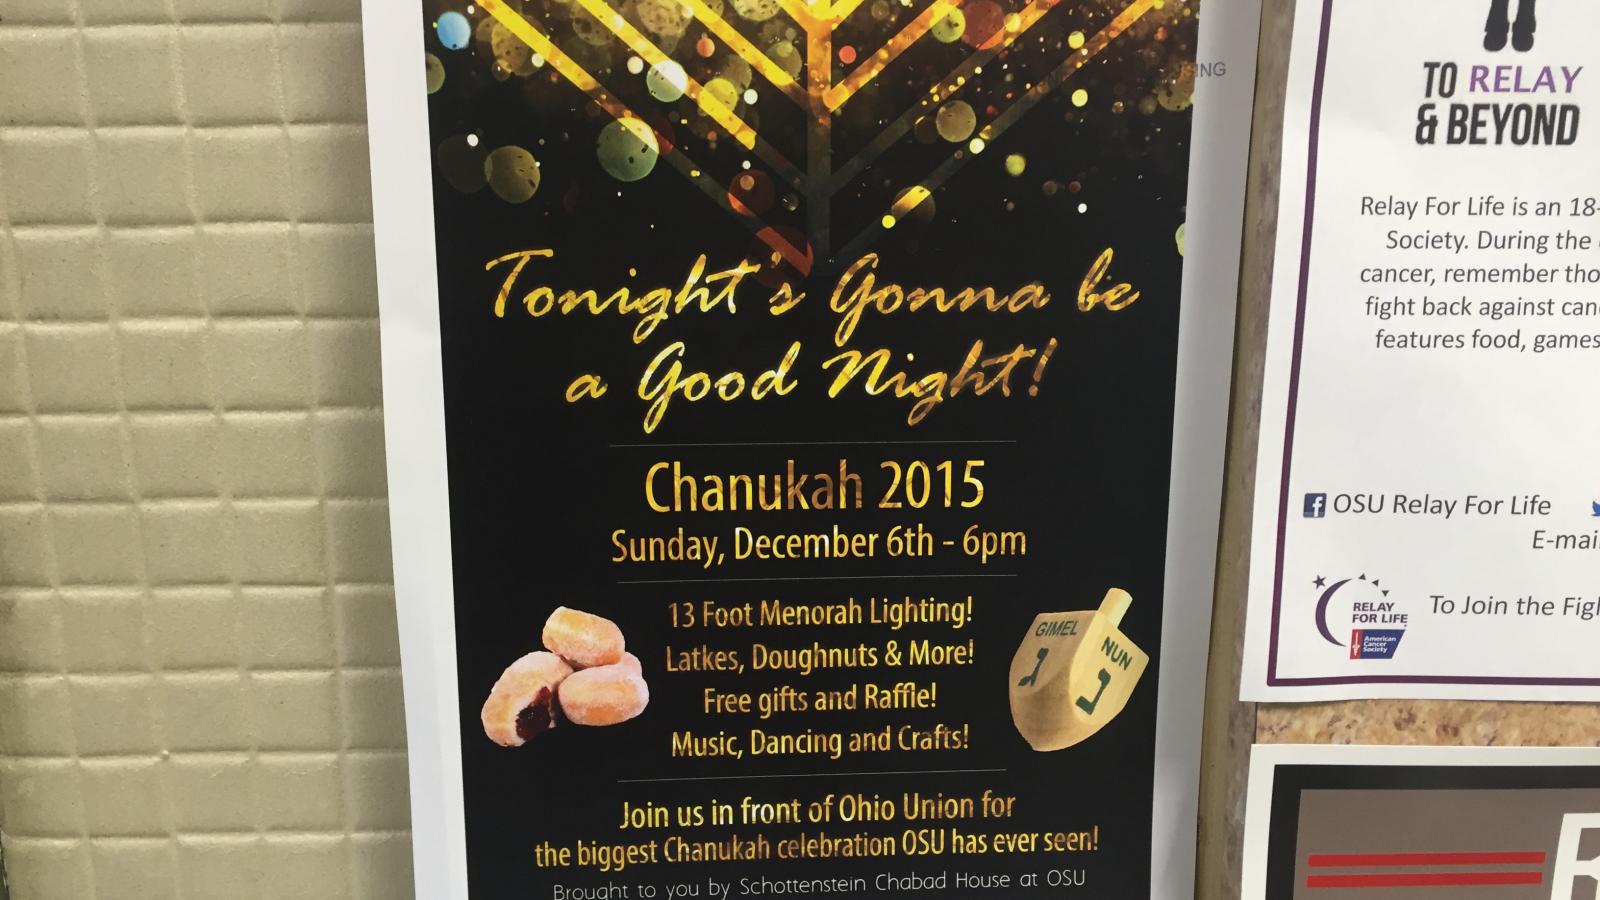 Ohio State University Campus Religion: Chanukah Celbration in Taylor Tower